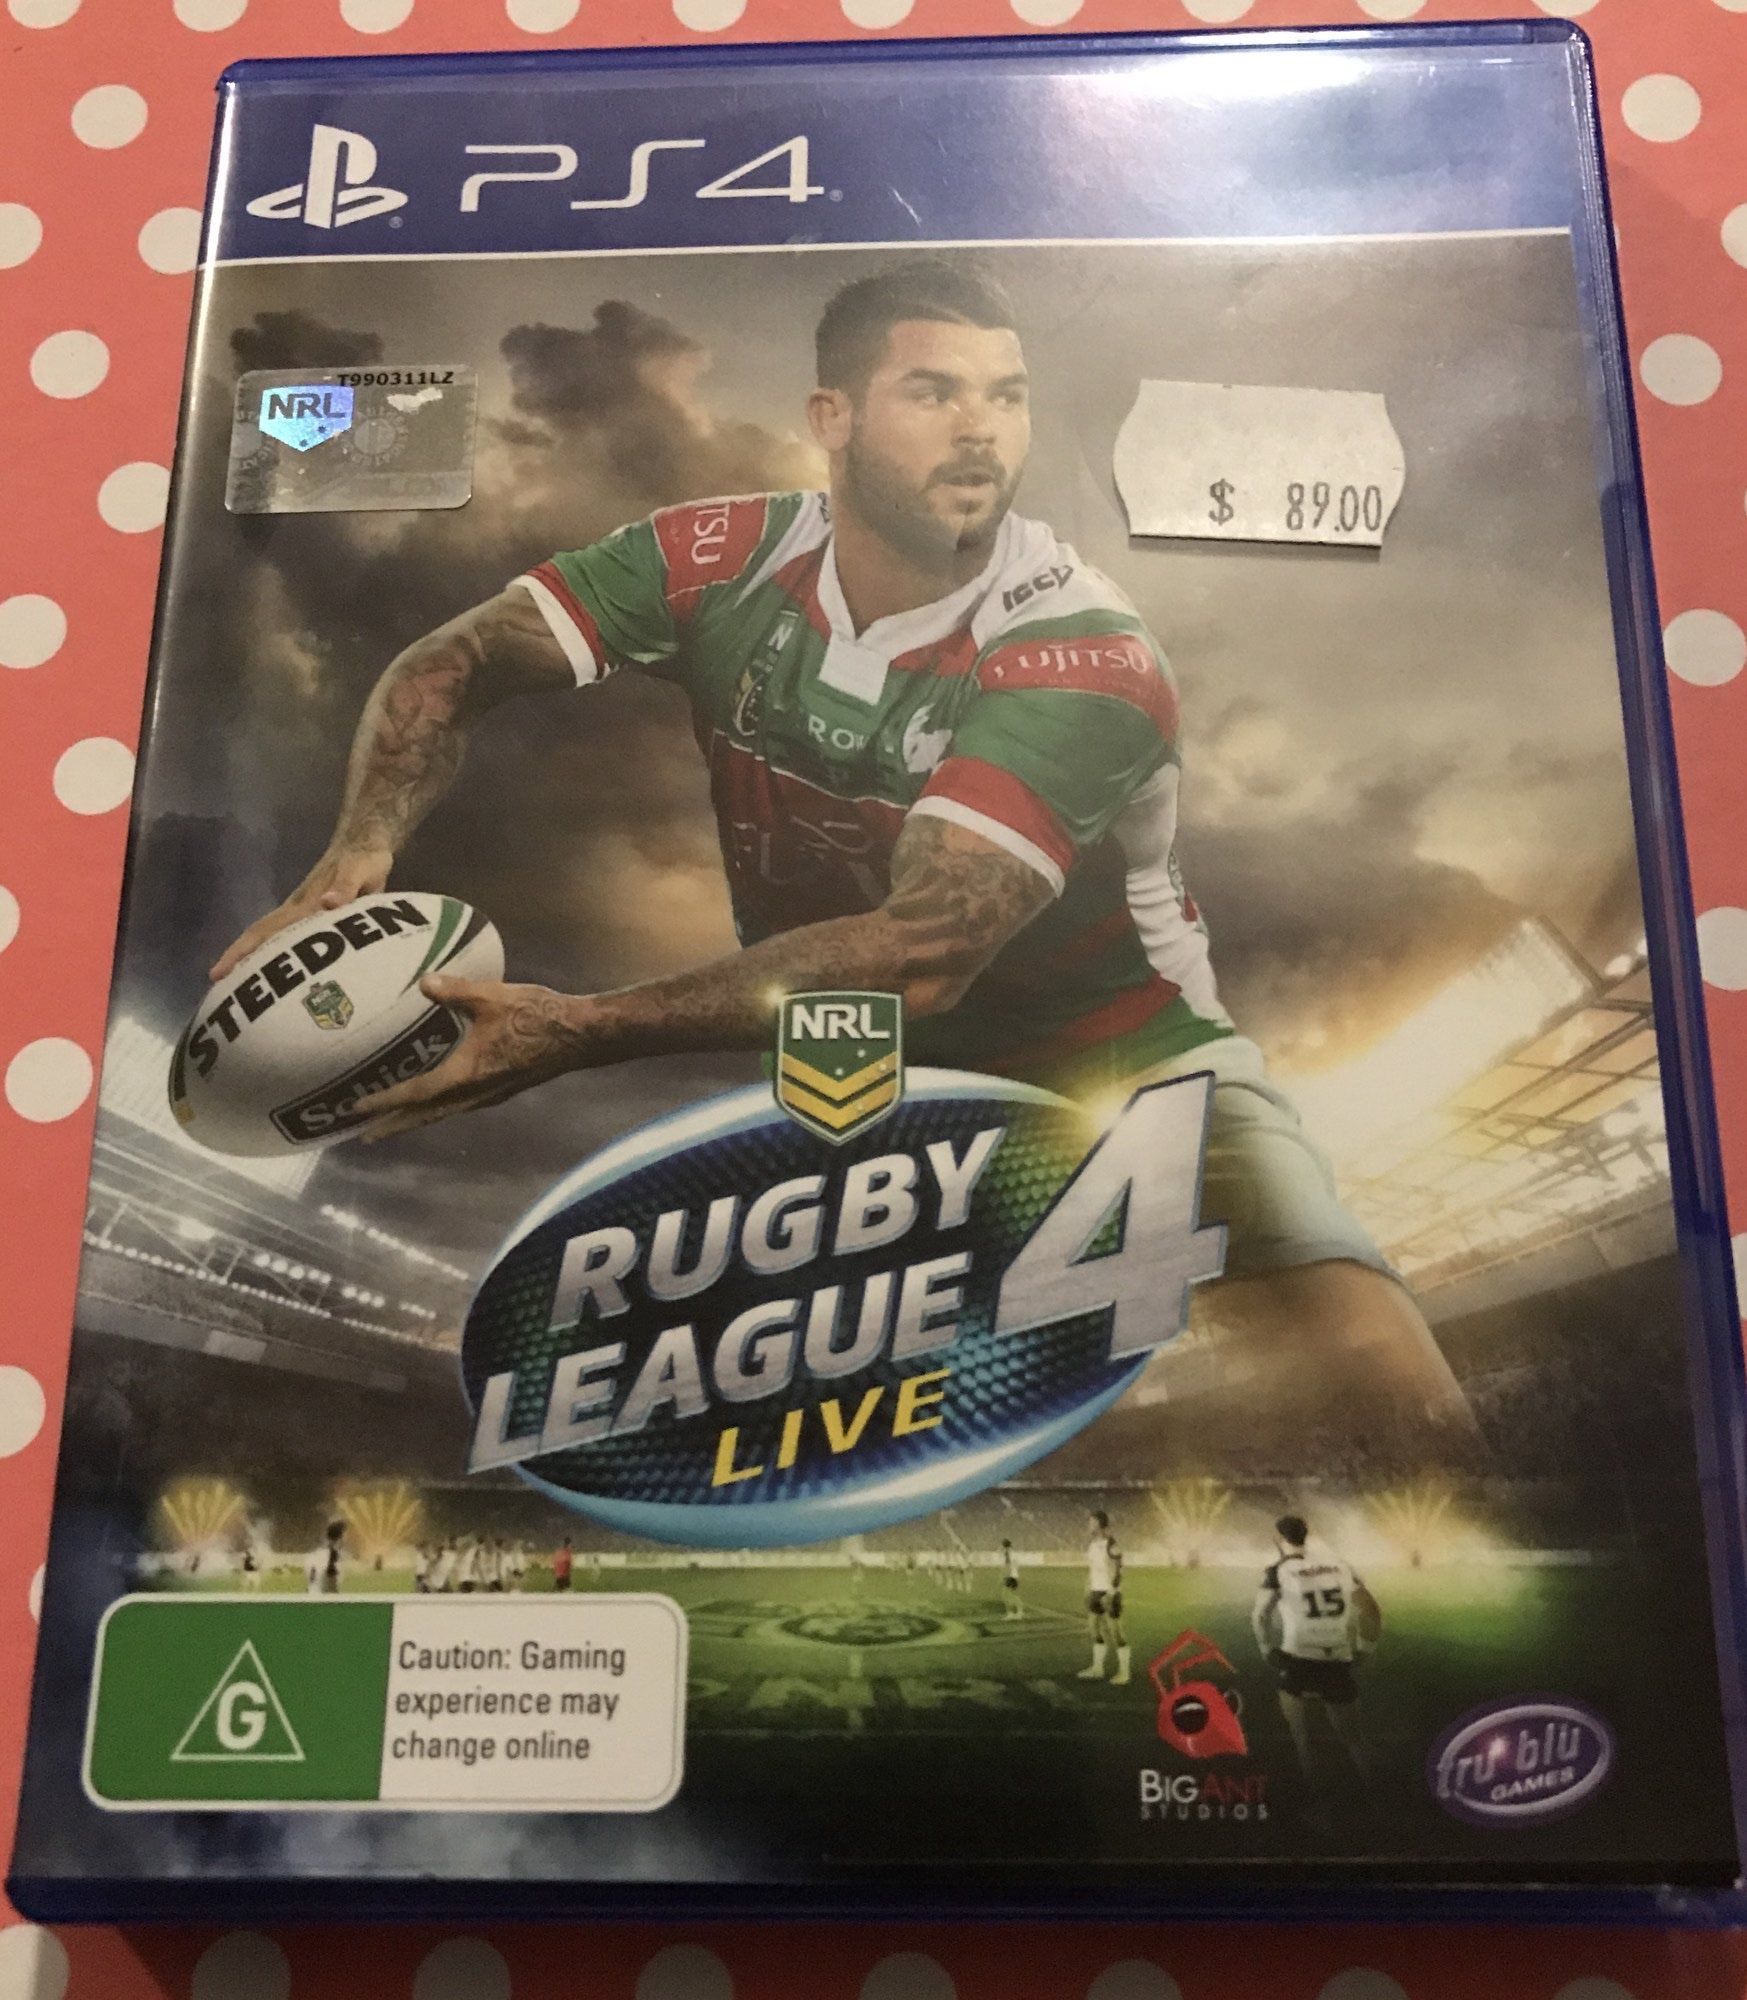 For Sale - PS4 RUGBY League live 4,Gta5,FIFA 17,NBA 2k17 Technology and Entertainment